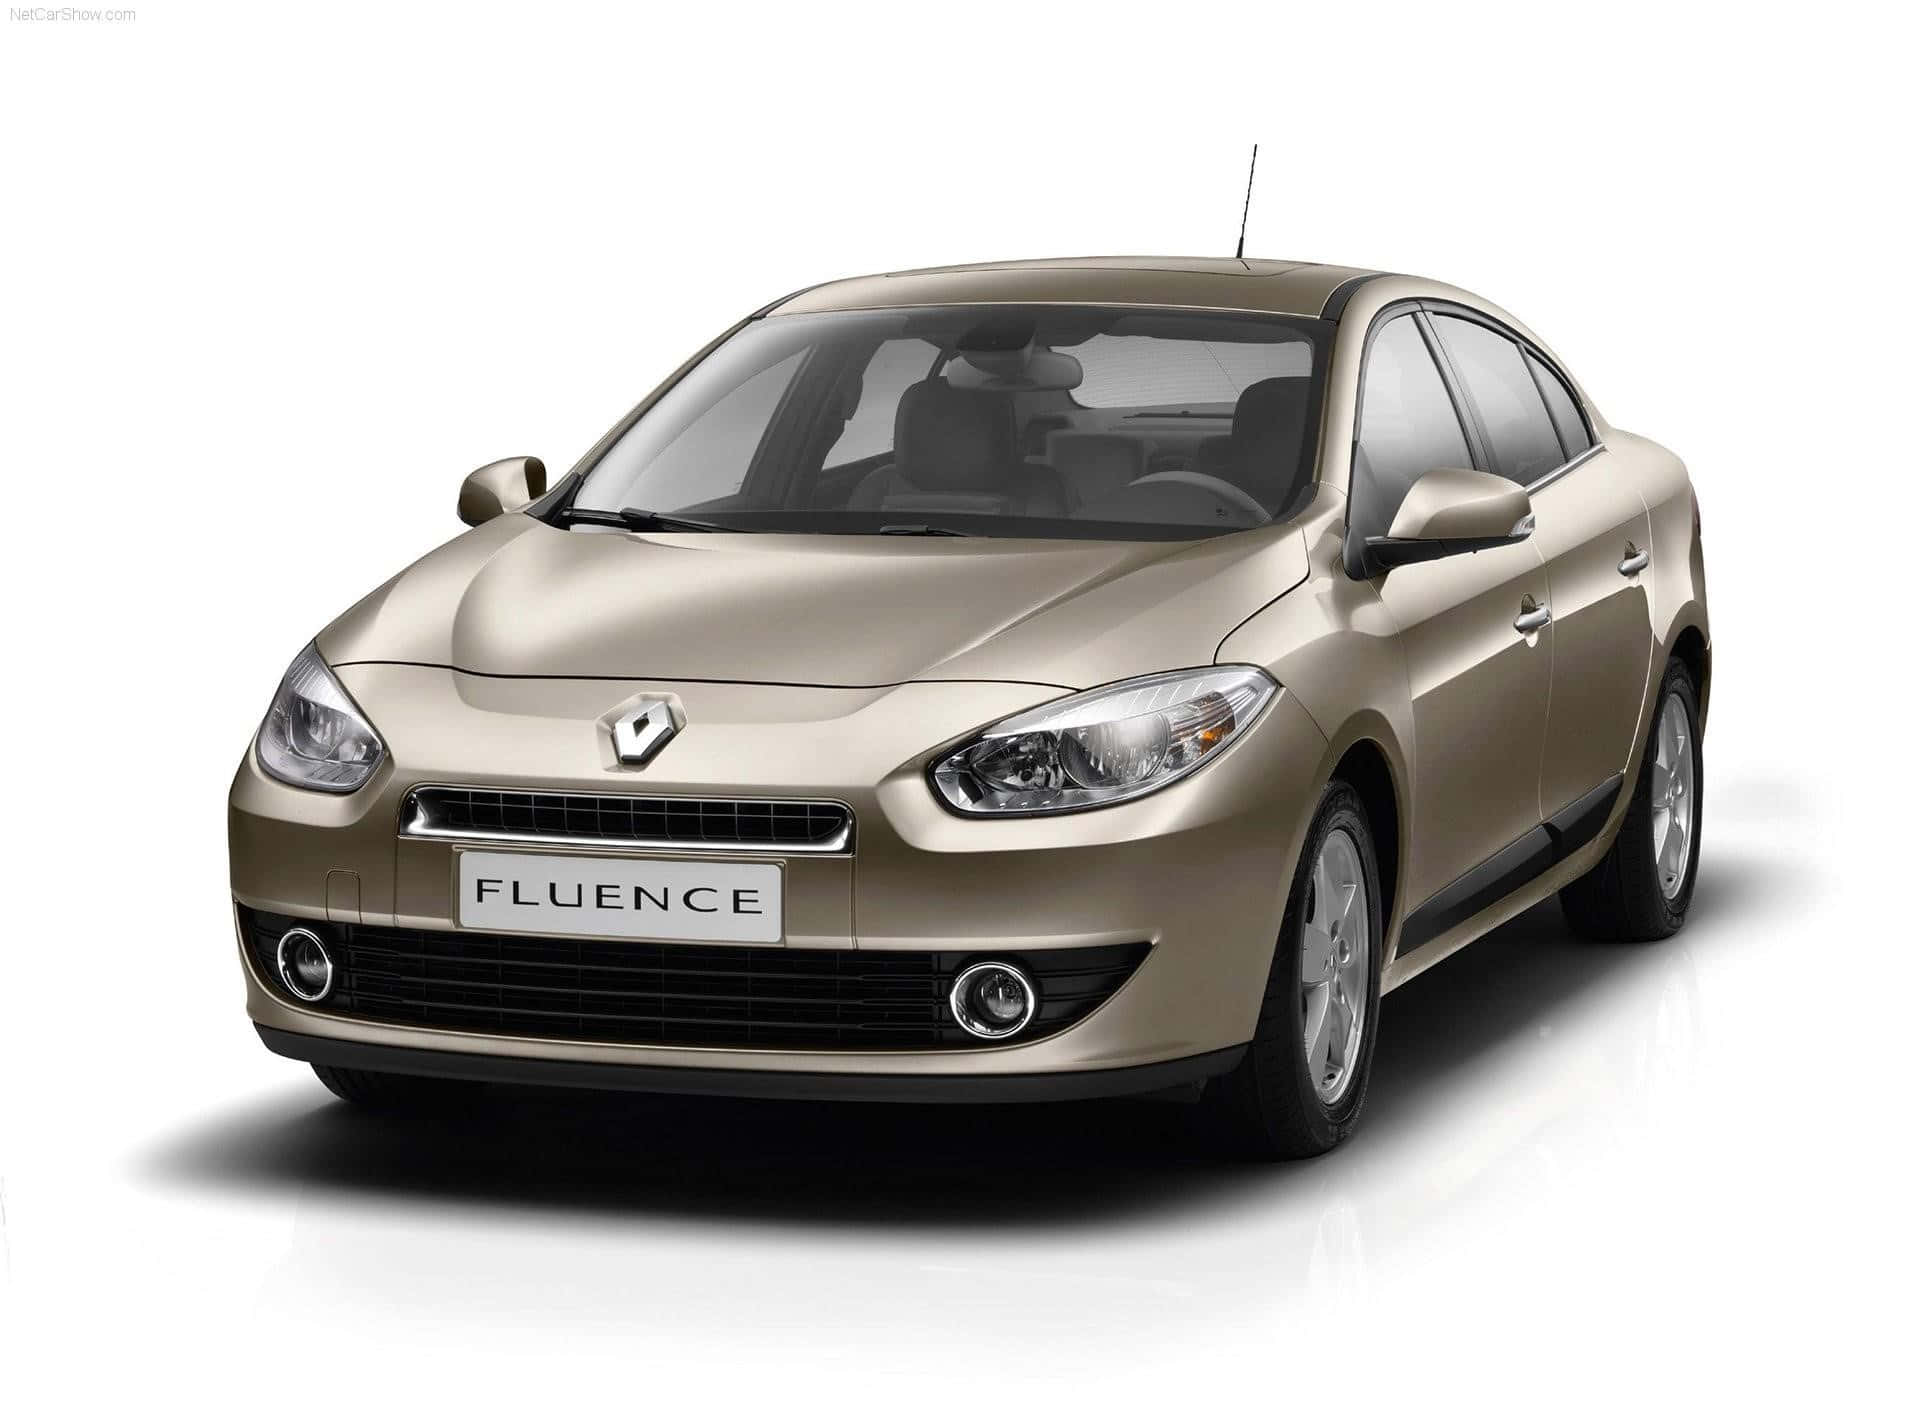 Sleek and Stylish Renault Fluence on the Road Wallpaper